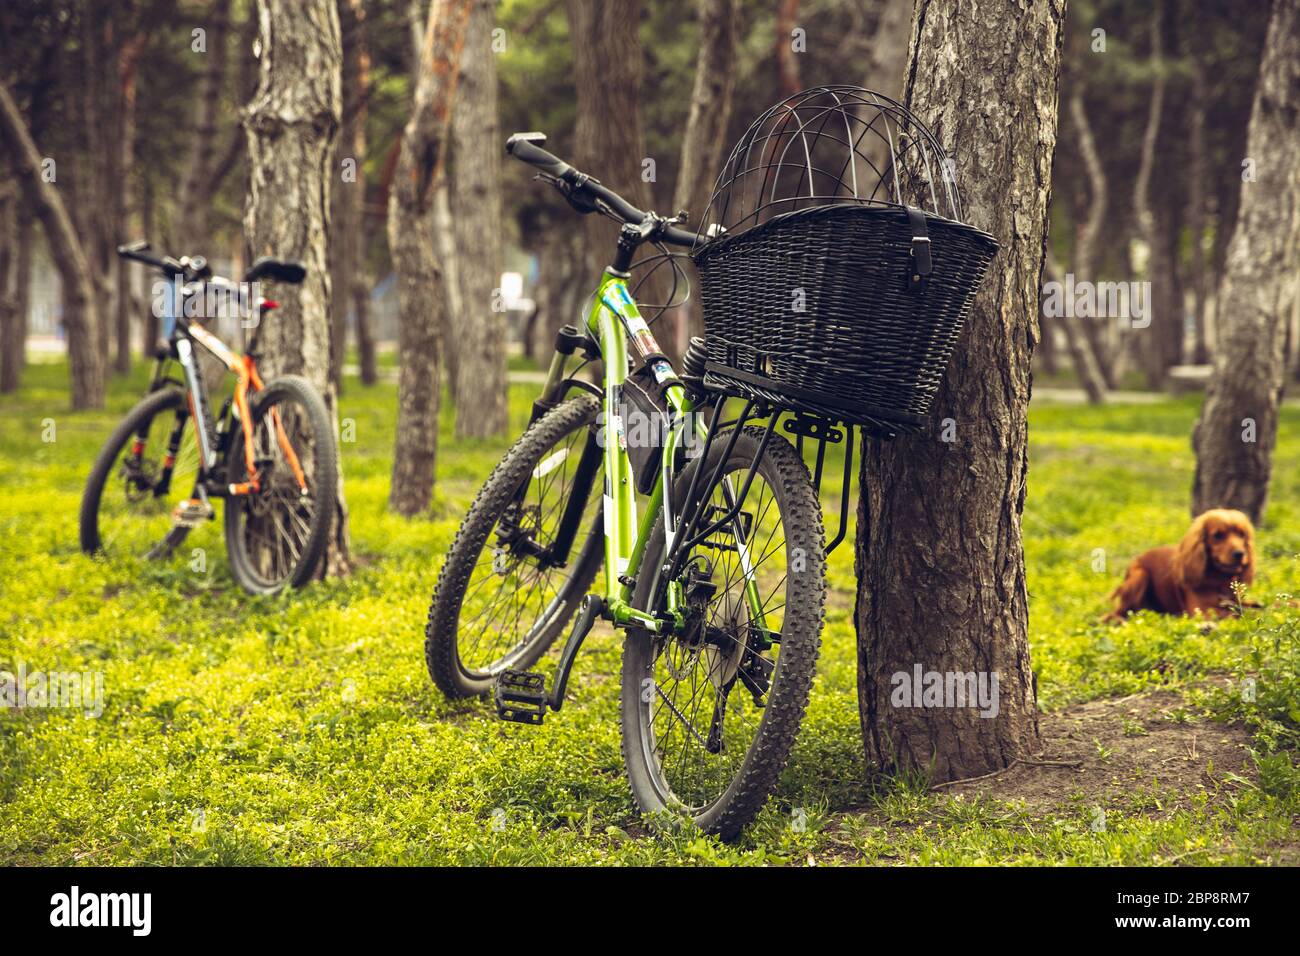 Bike left near tree with green nature around it. Countryside park, riding bikes, spending time healthy. Calm nature, spring day, positive emotions. Sportive, active leisure activity. Traveling. Stock Photo